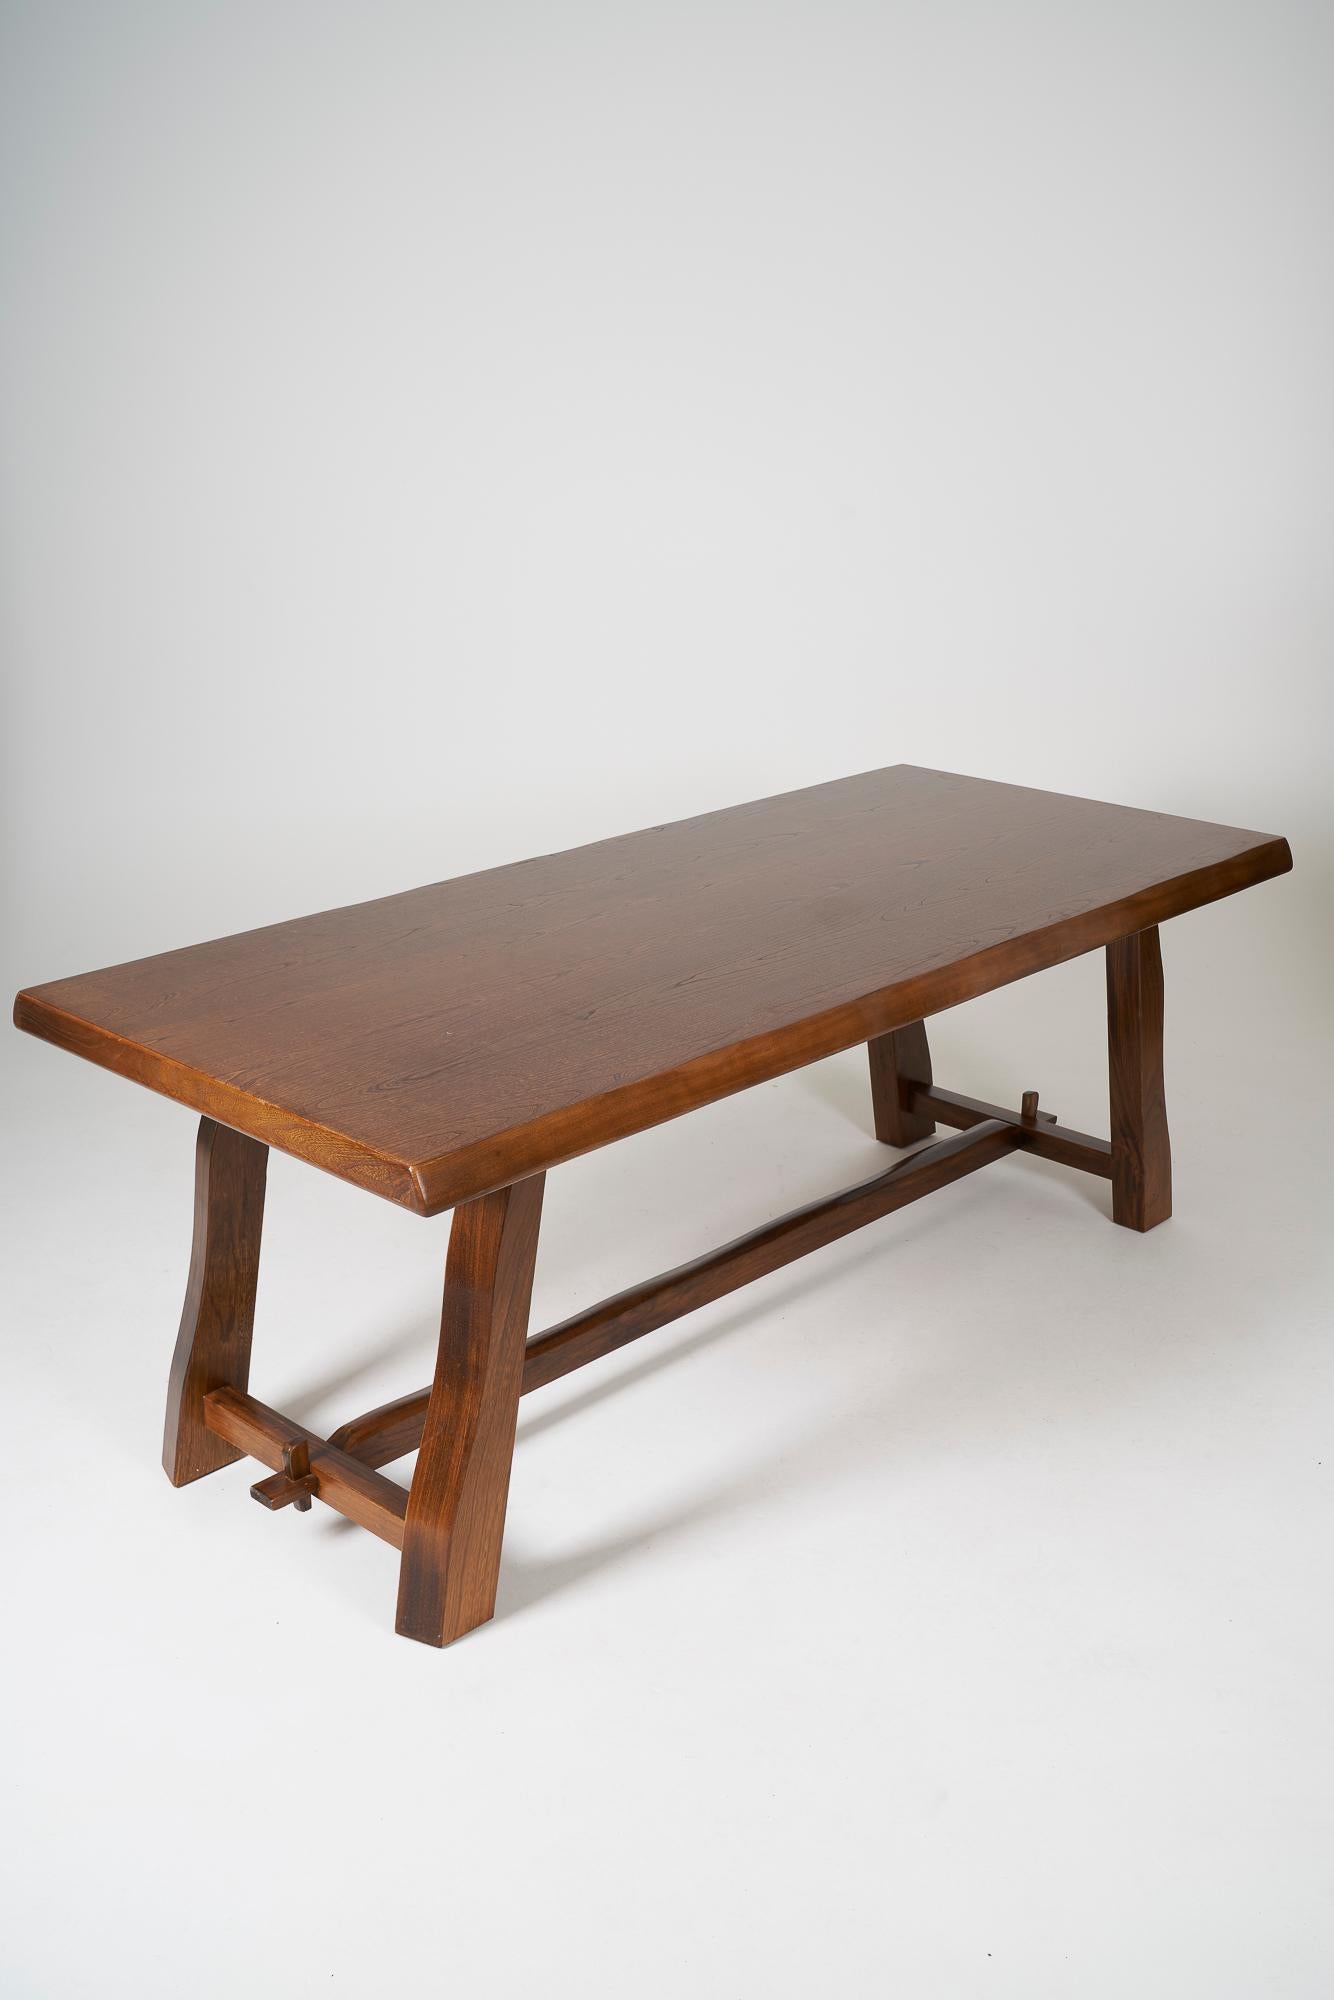 Beautiful solid elm dining table by Olavi Hanninen, Finland 1960s. In excellent condition with a very nice patina.